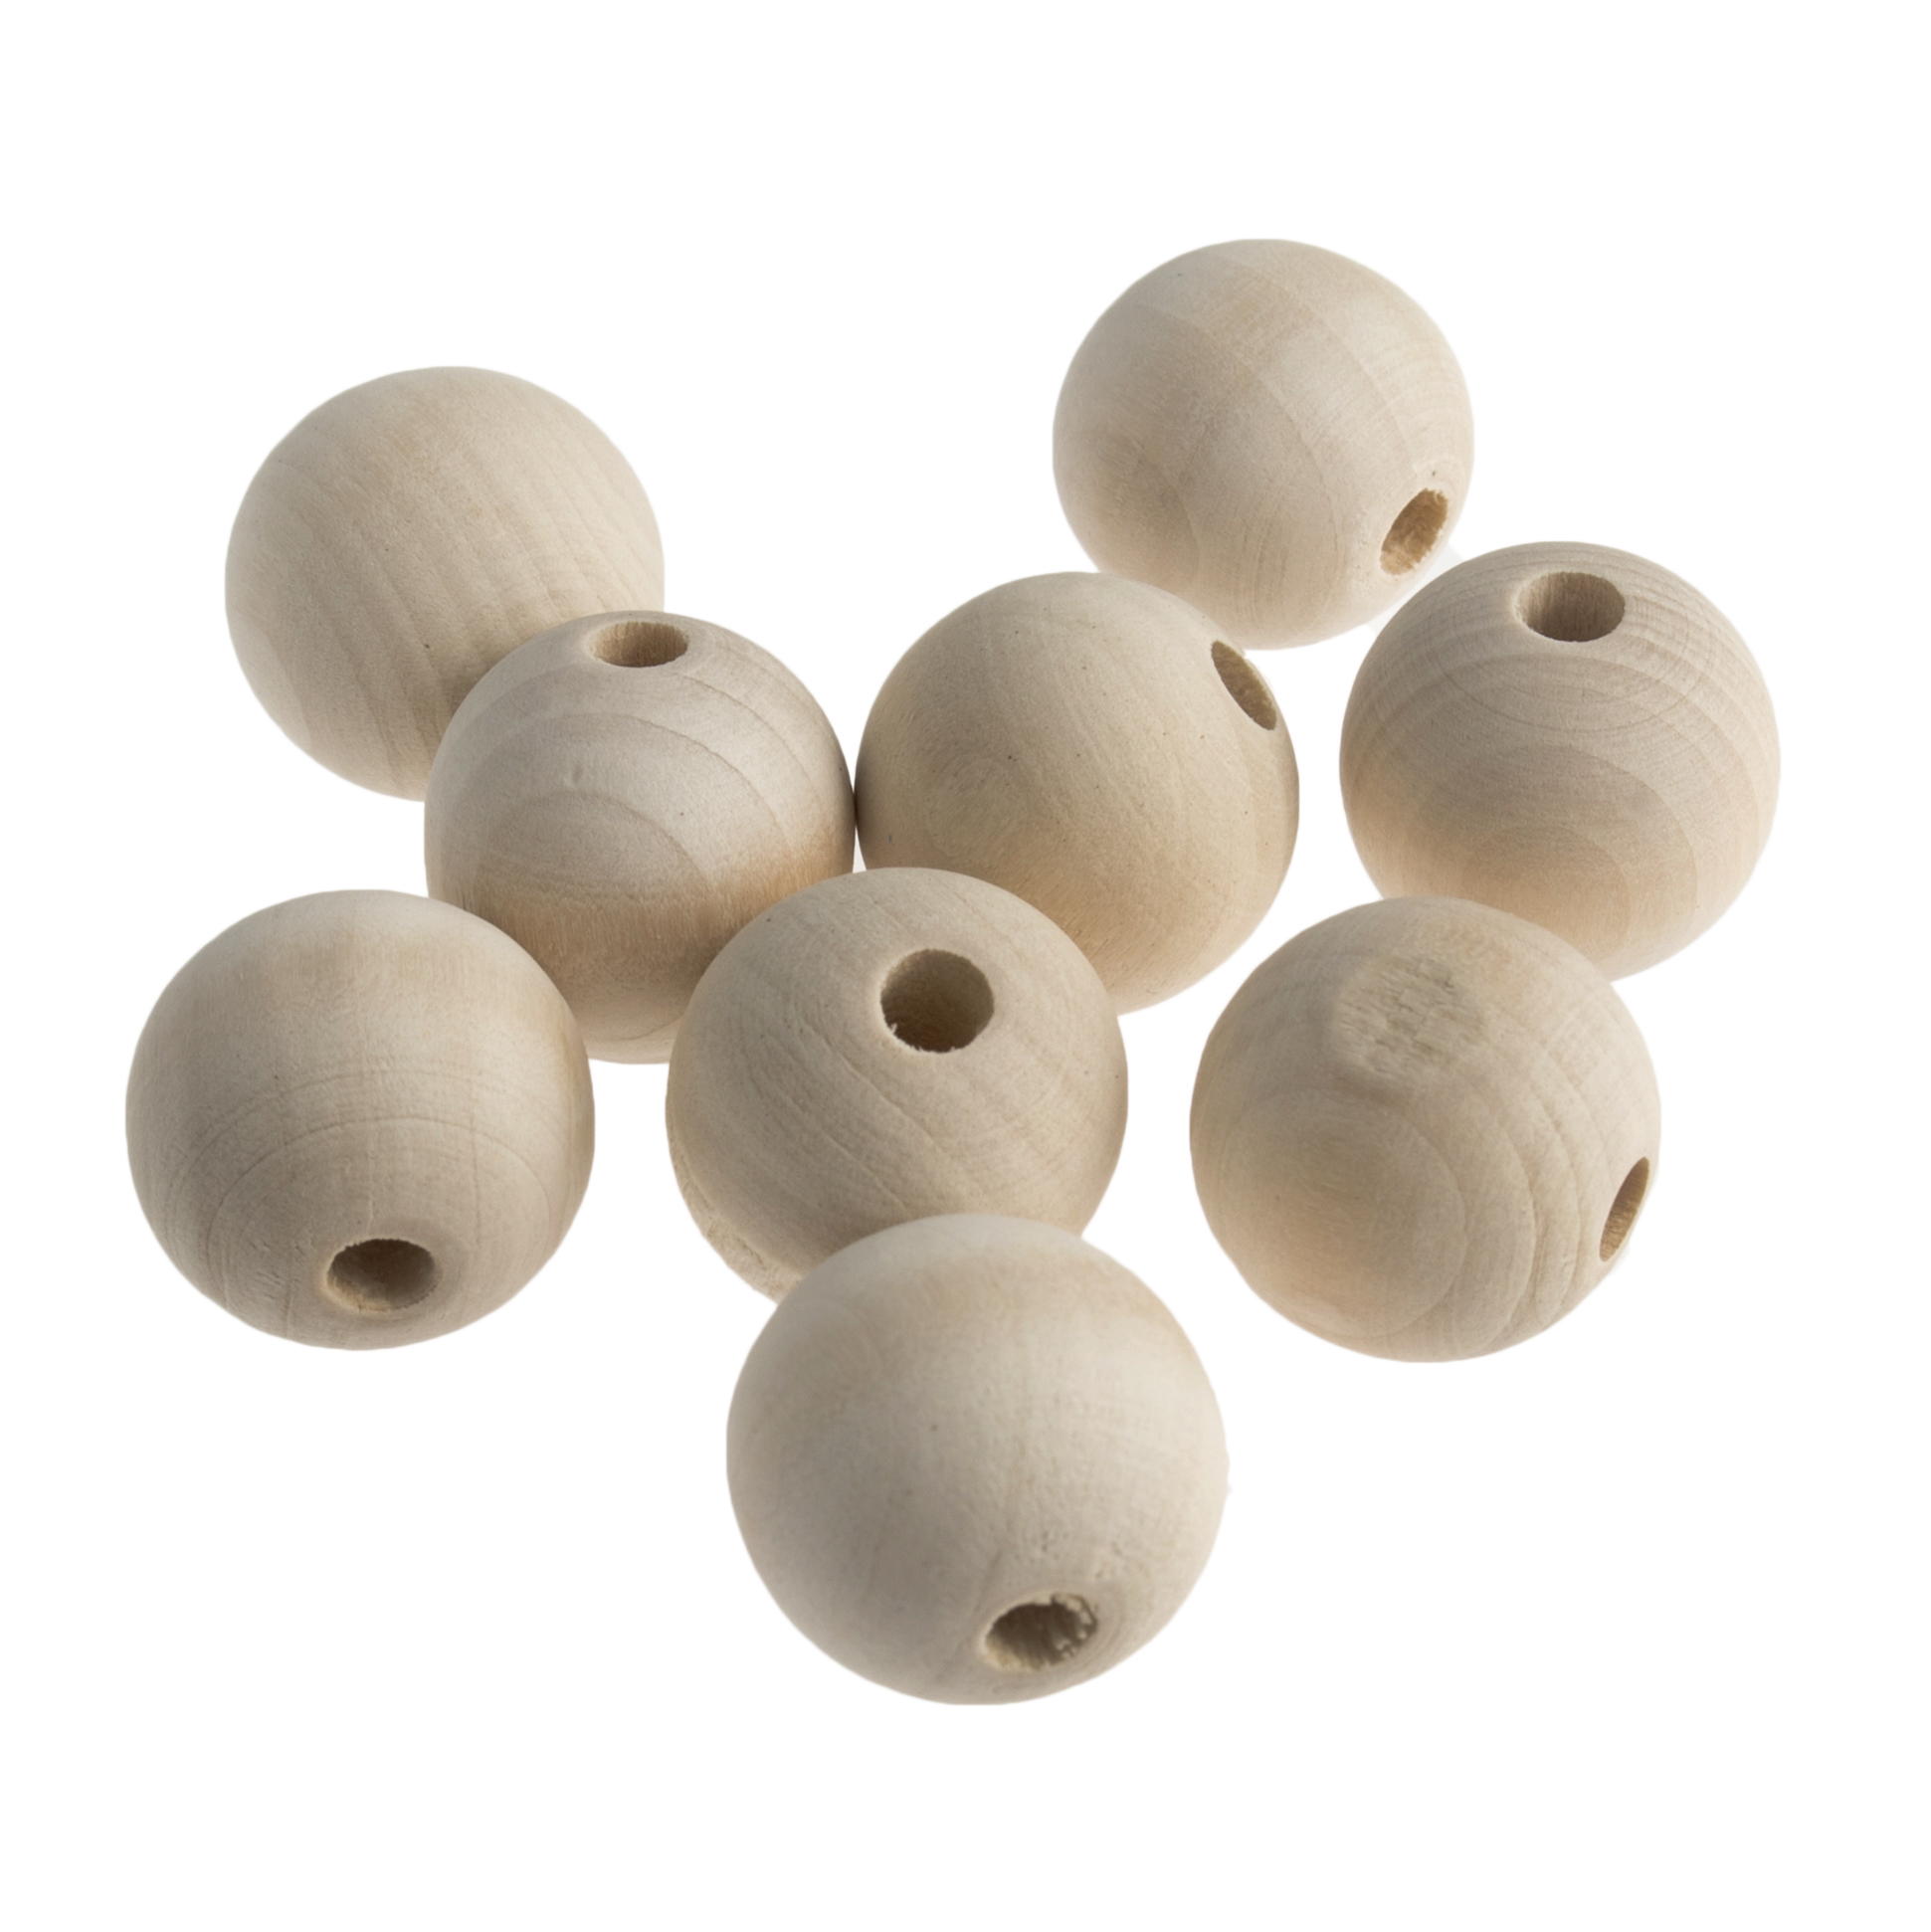 Wooden Craft Beads: 2.5cm: 9 Pieces - Trimits - Groves and Banks